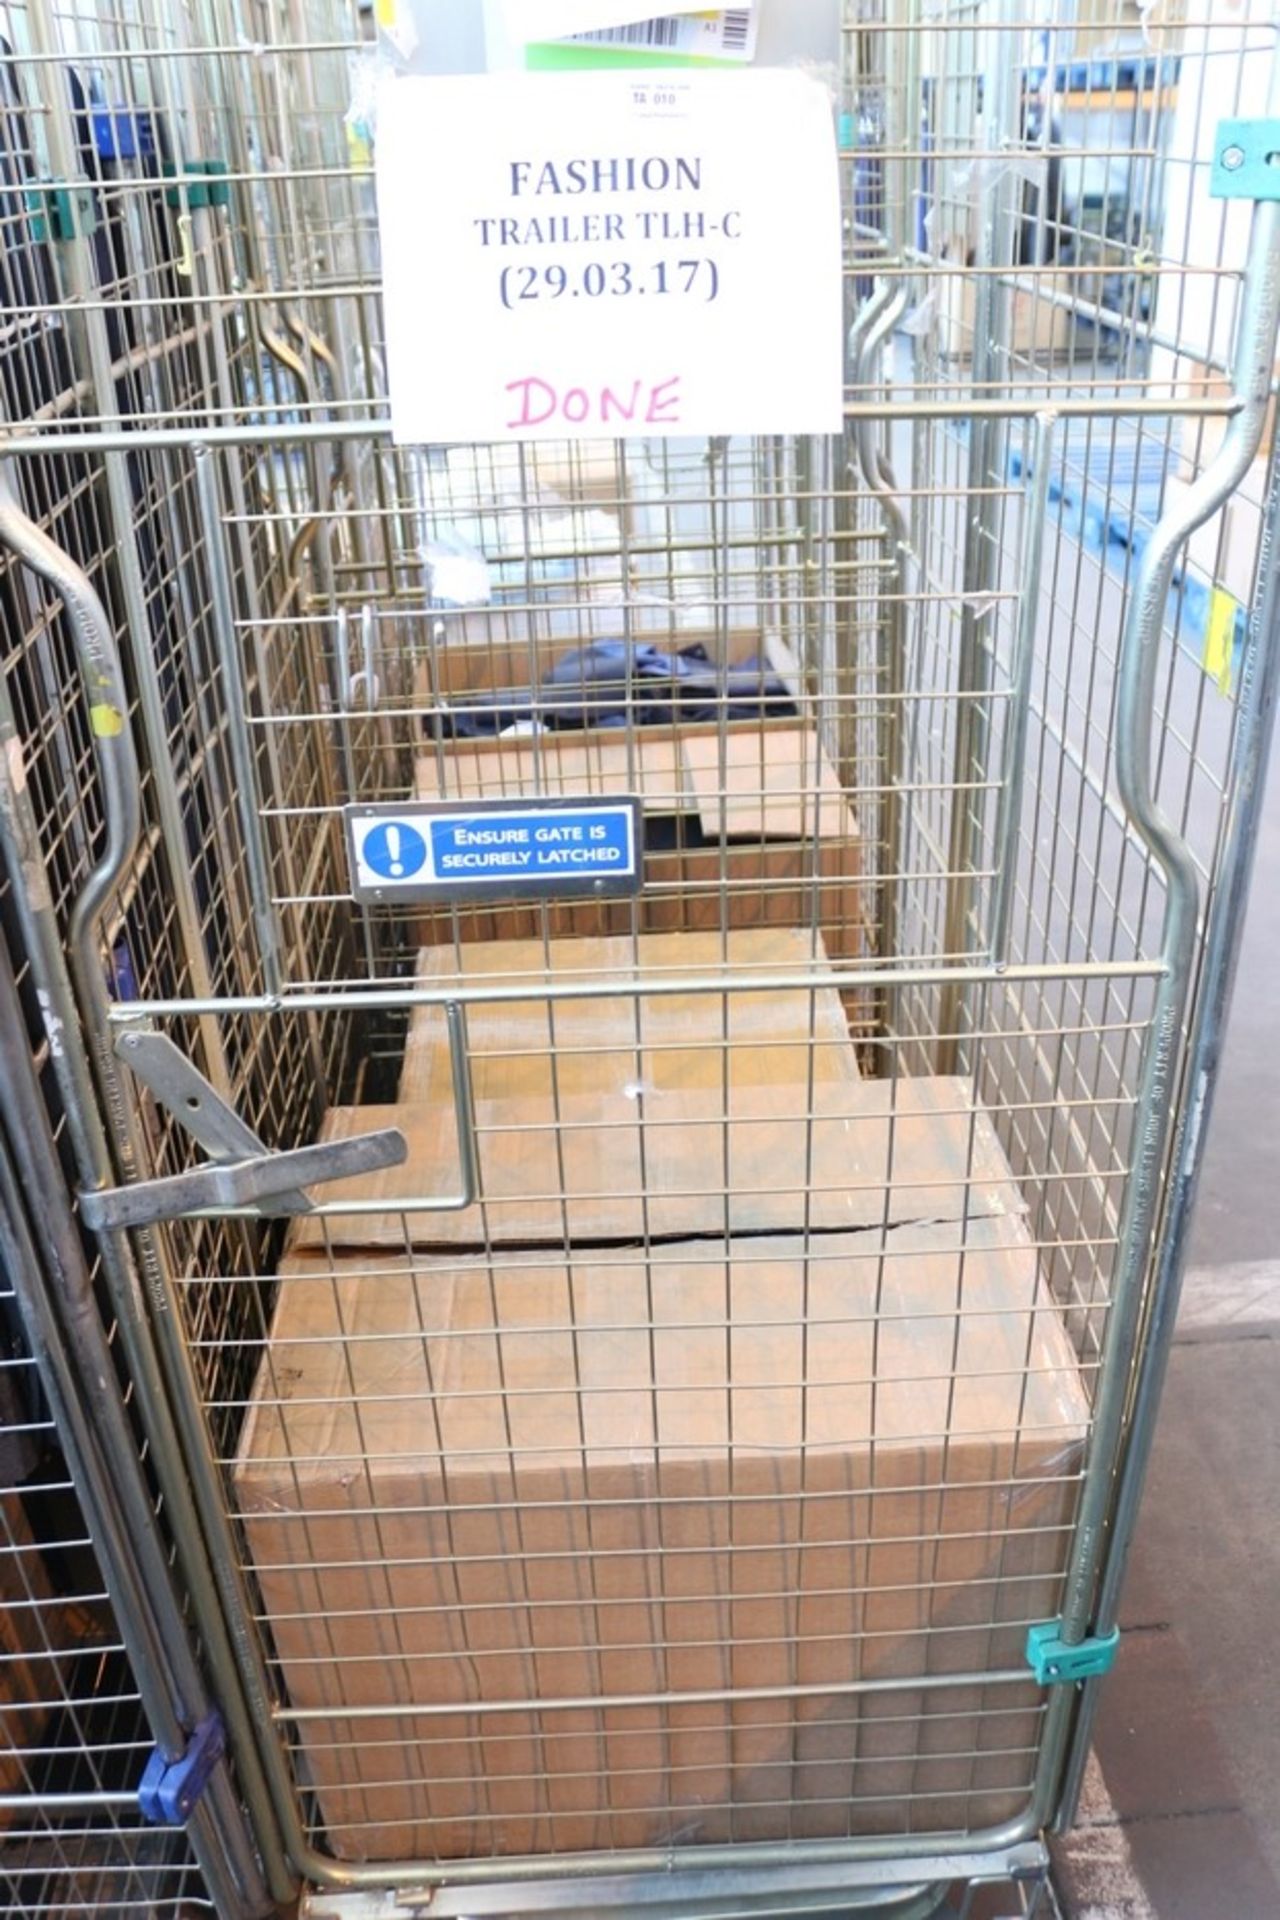 ONE CAGE TO CONTAIN APPROX 73 UNITS OF UNUSED ASSORTED DESIGNER ITEMS RANGING FROM MEN'S/WOMEN'S/